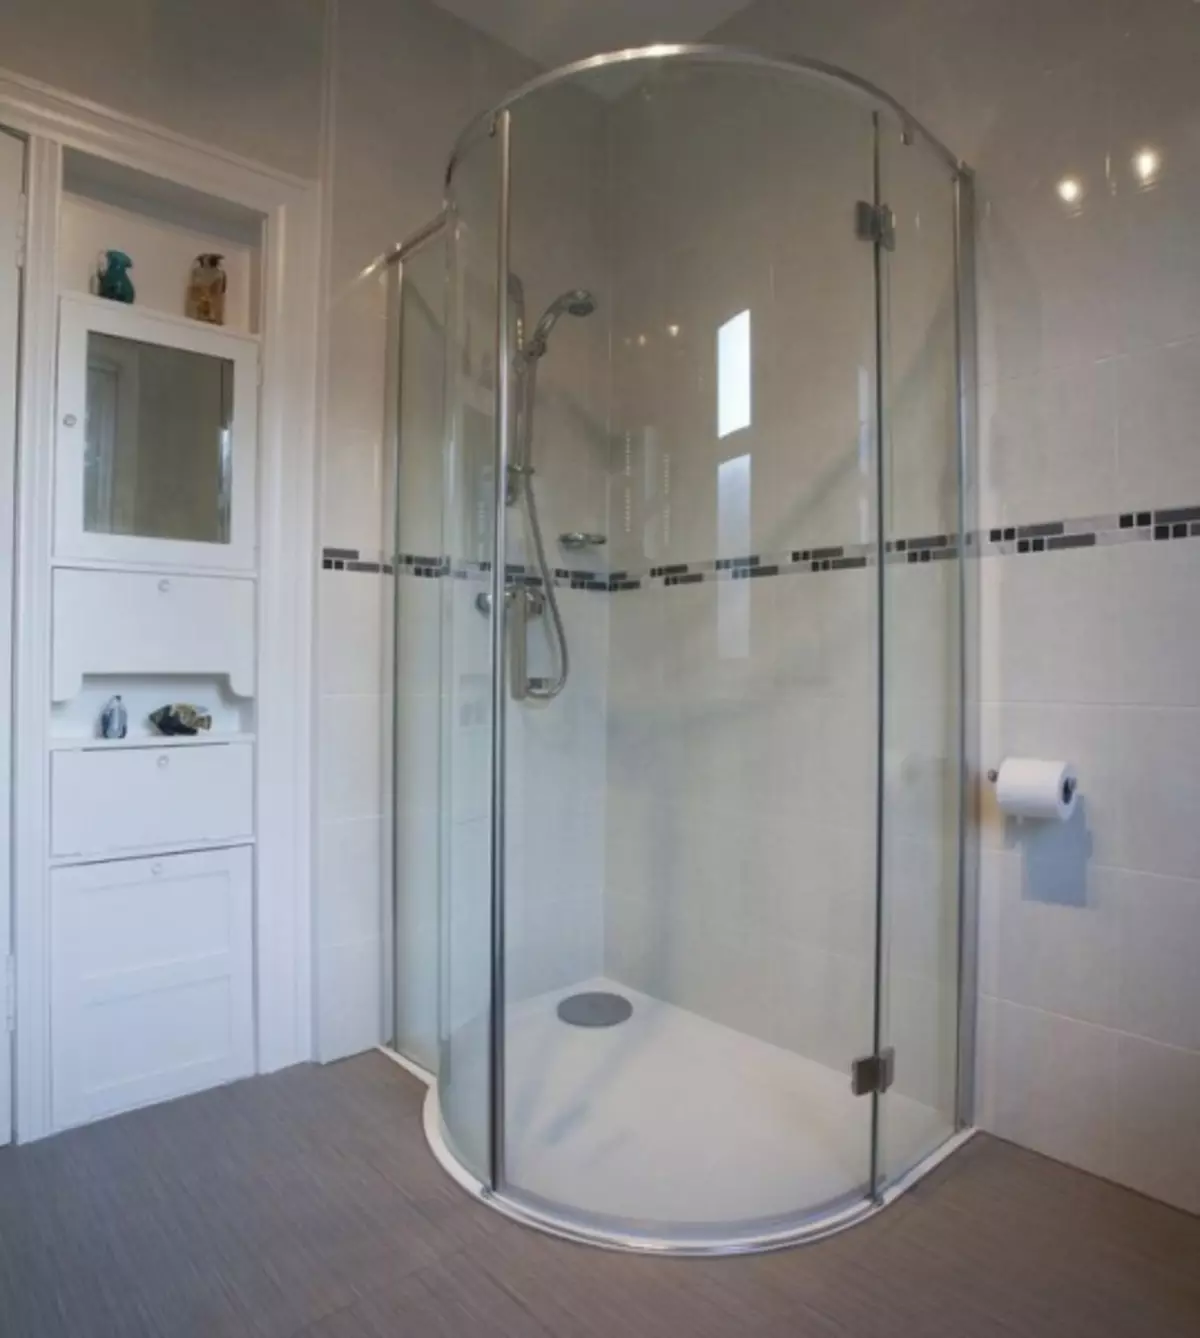 Low Pallet Shower Cab - Optimal Solution for Small Bathrooms